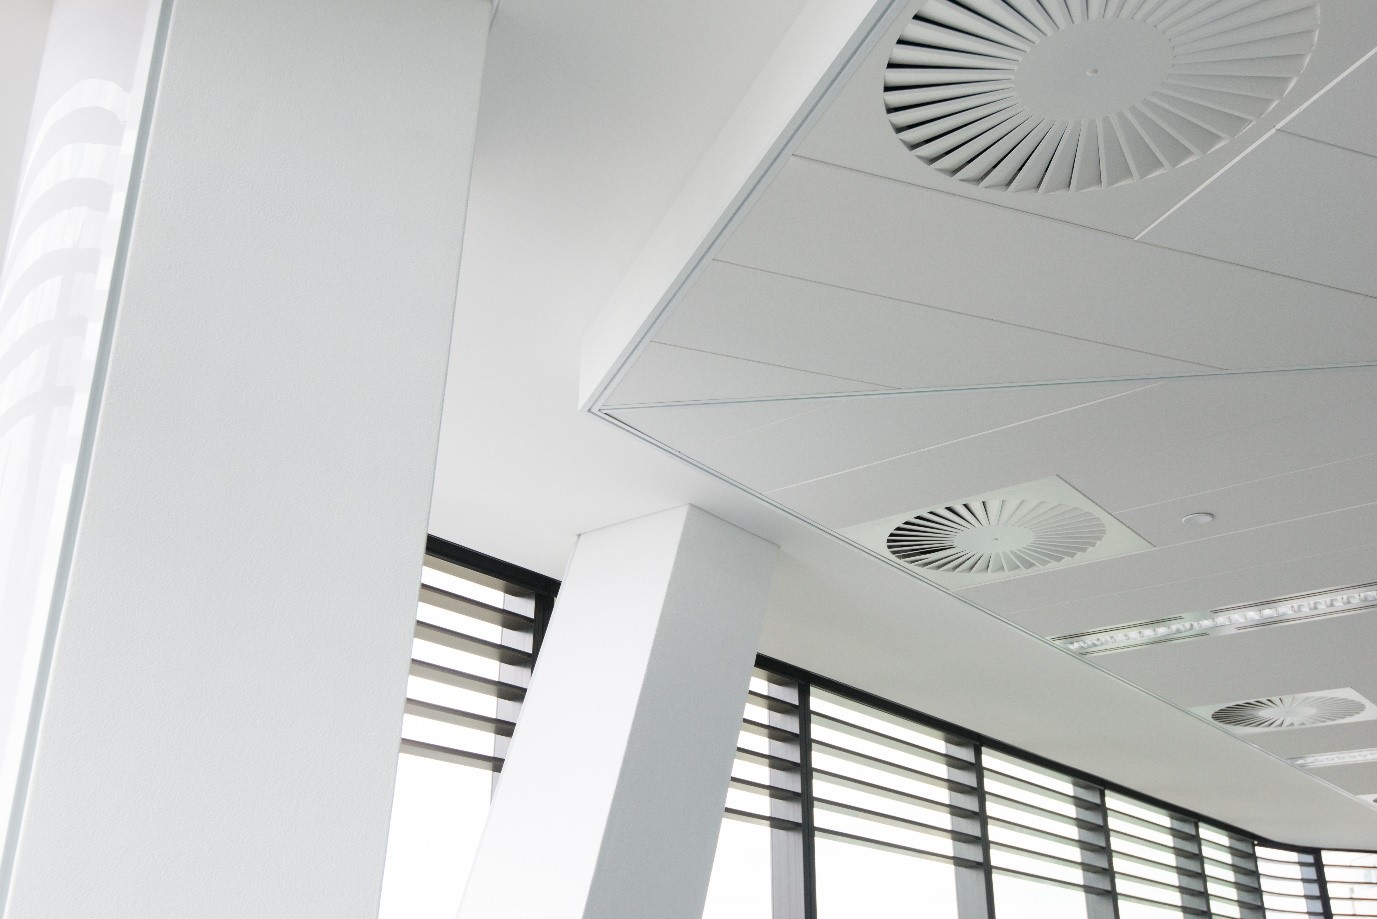 5 Considerations When Choosing the Right Modular Metal Ceiling